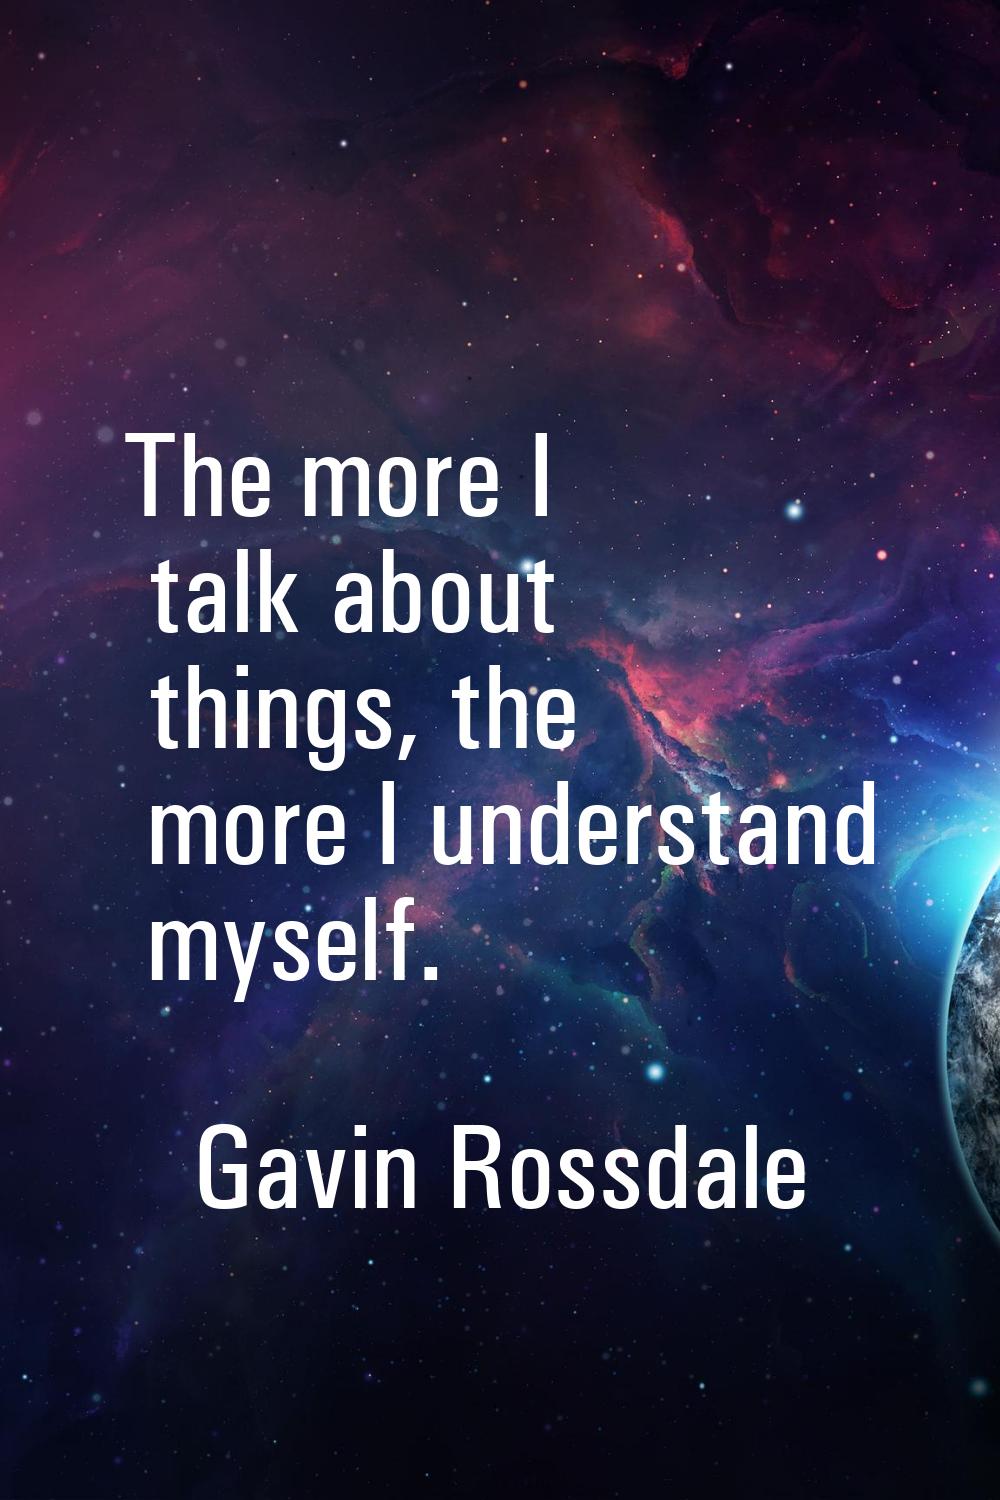 The more I talk about things, the more I understand myself.